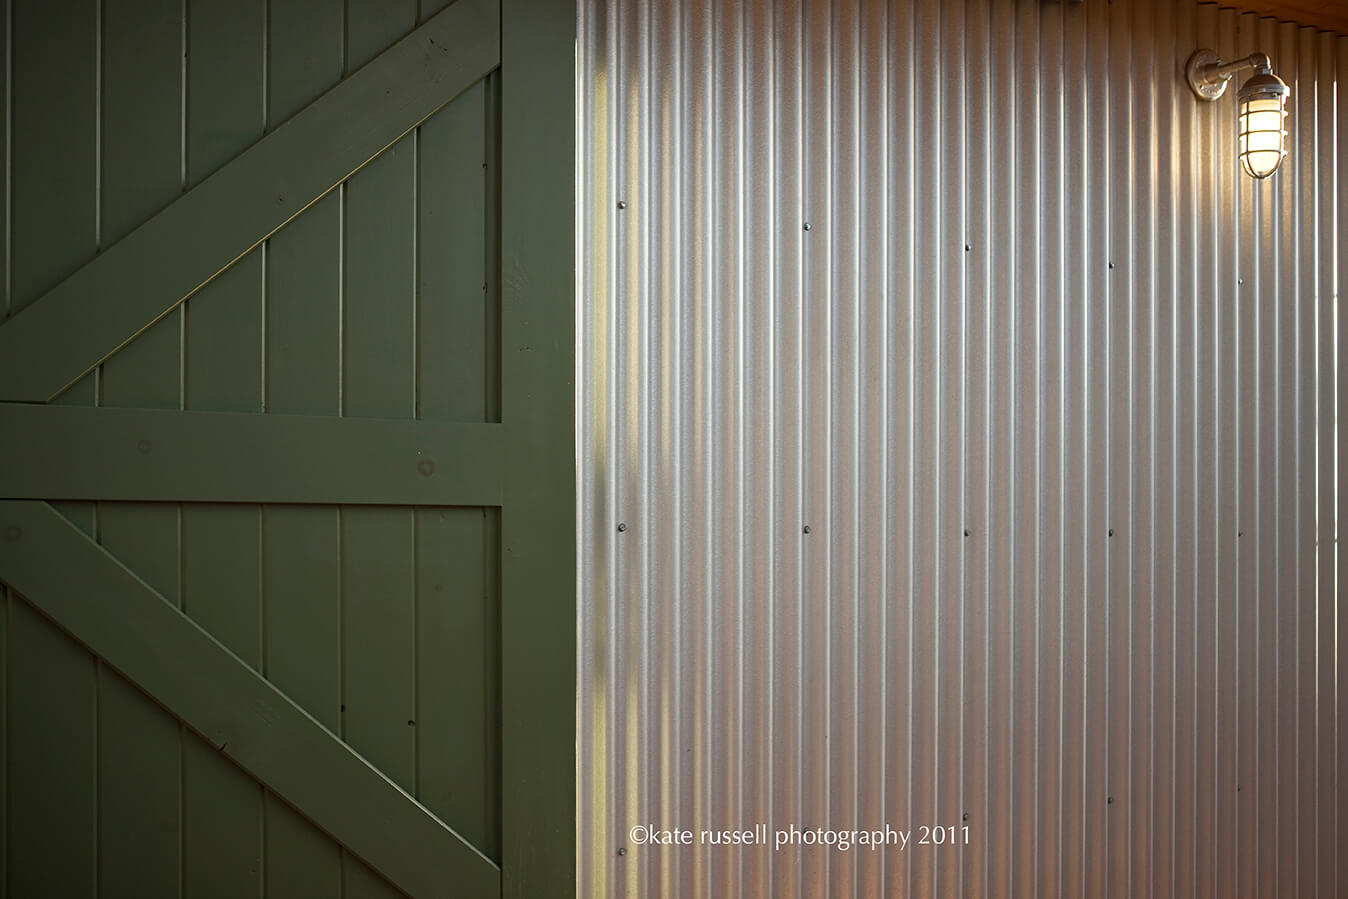 A barn door with a light on it designed by an architect.